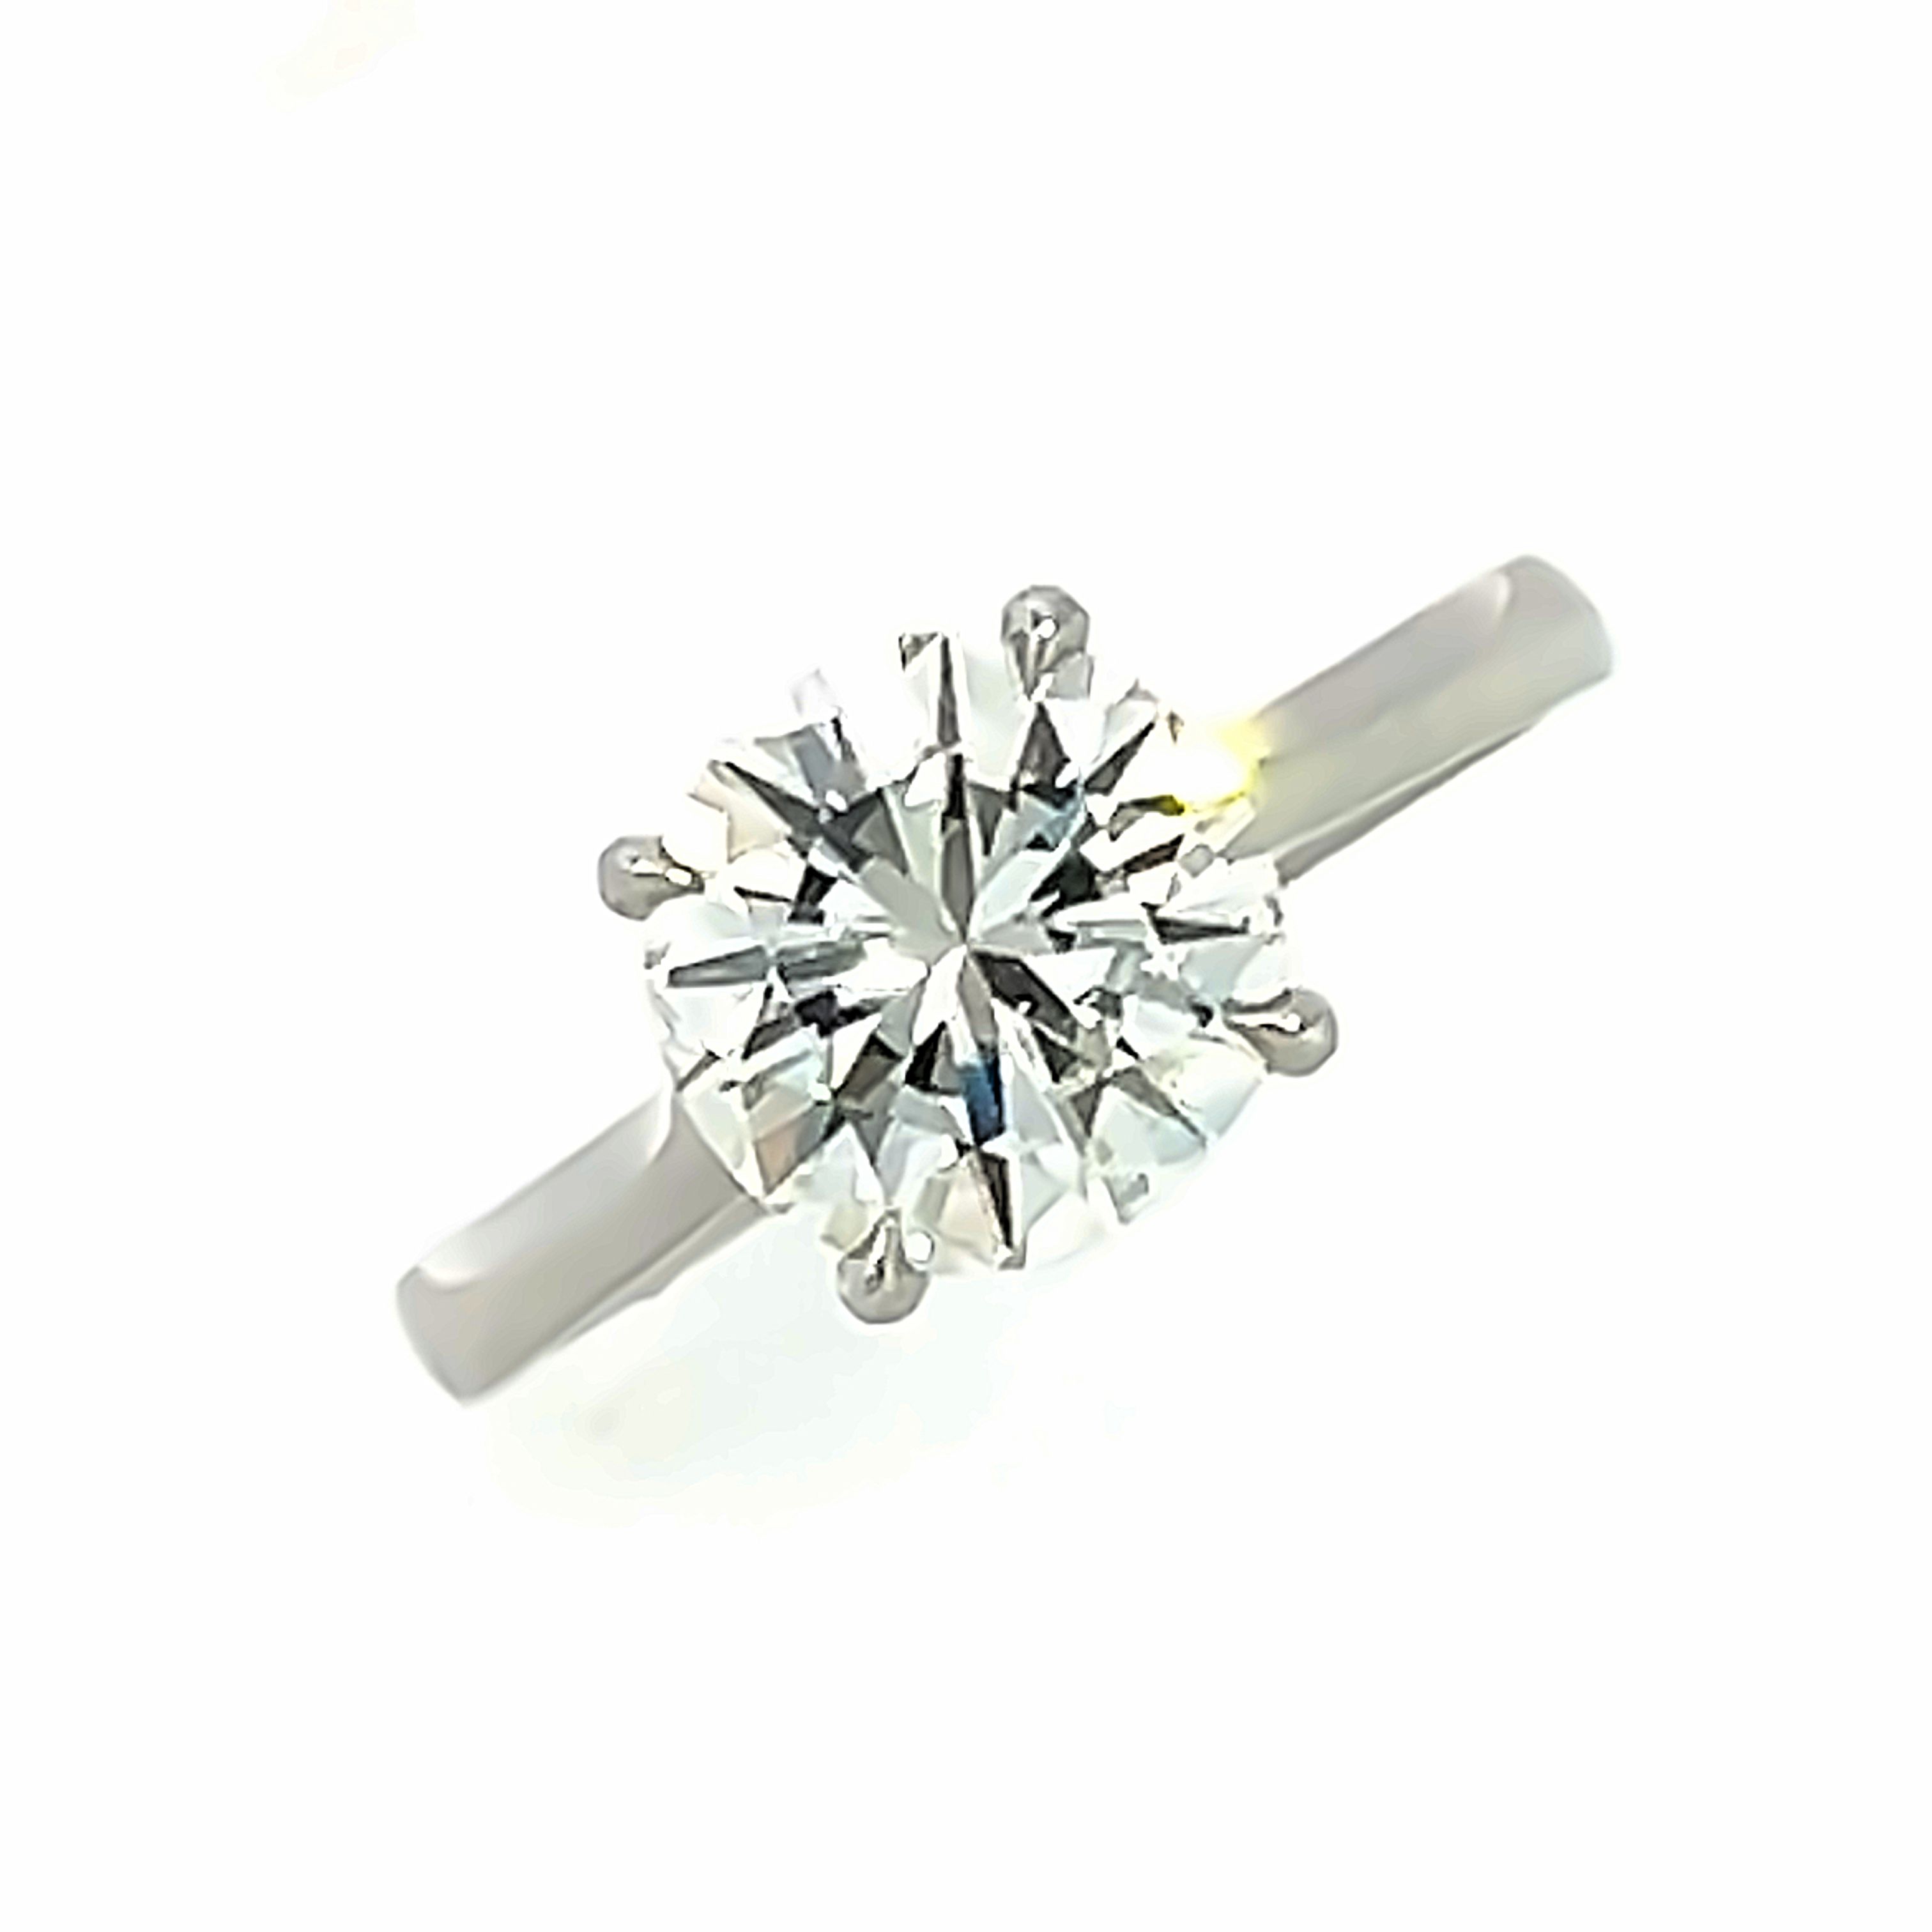 2.14 Carat Platinum Engagement Ring from our Constellation Rang